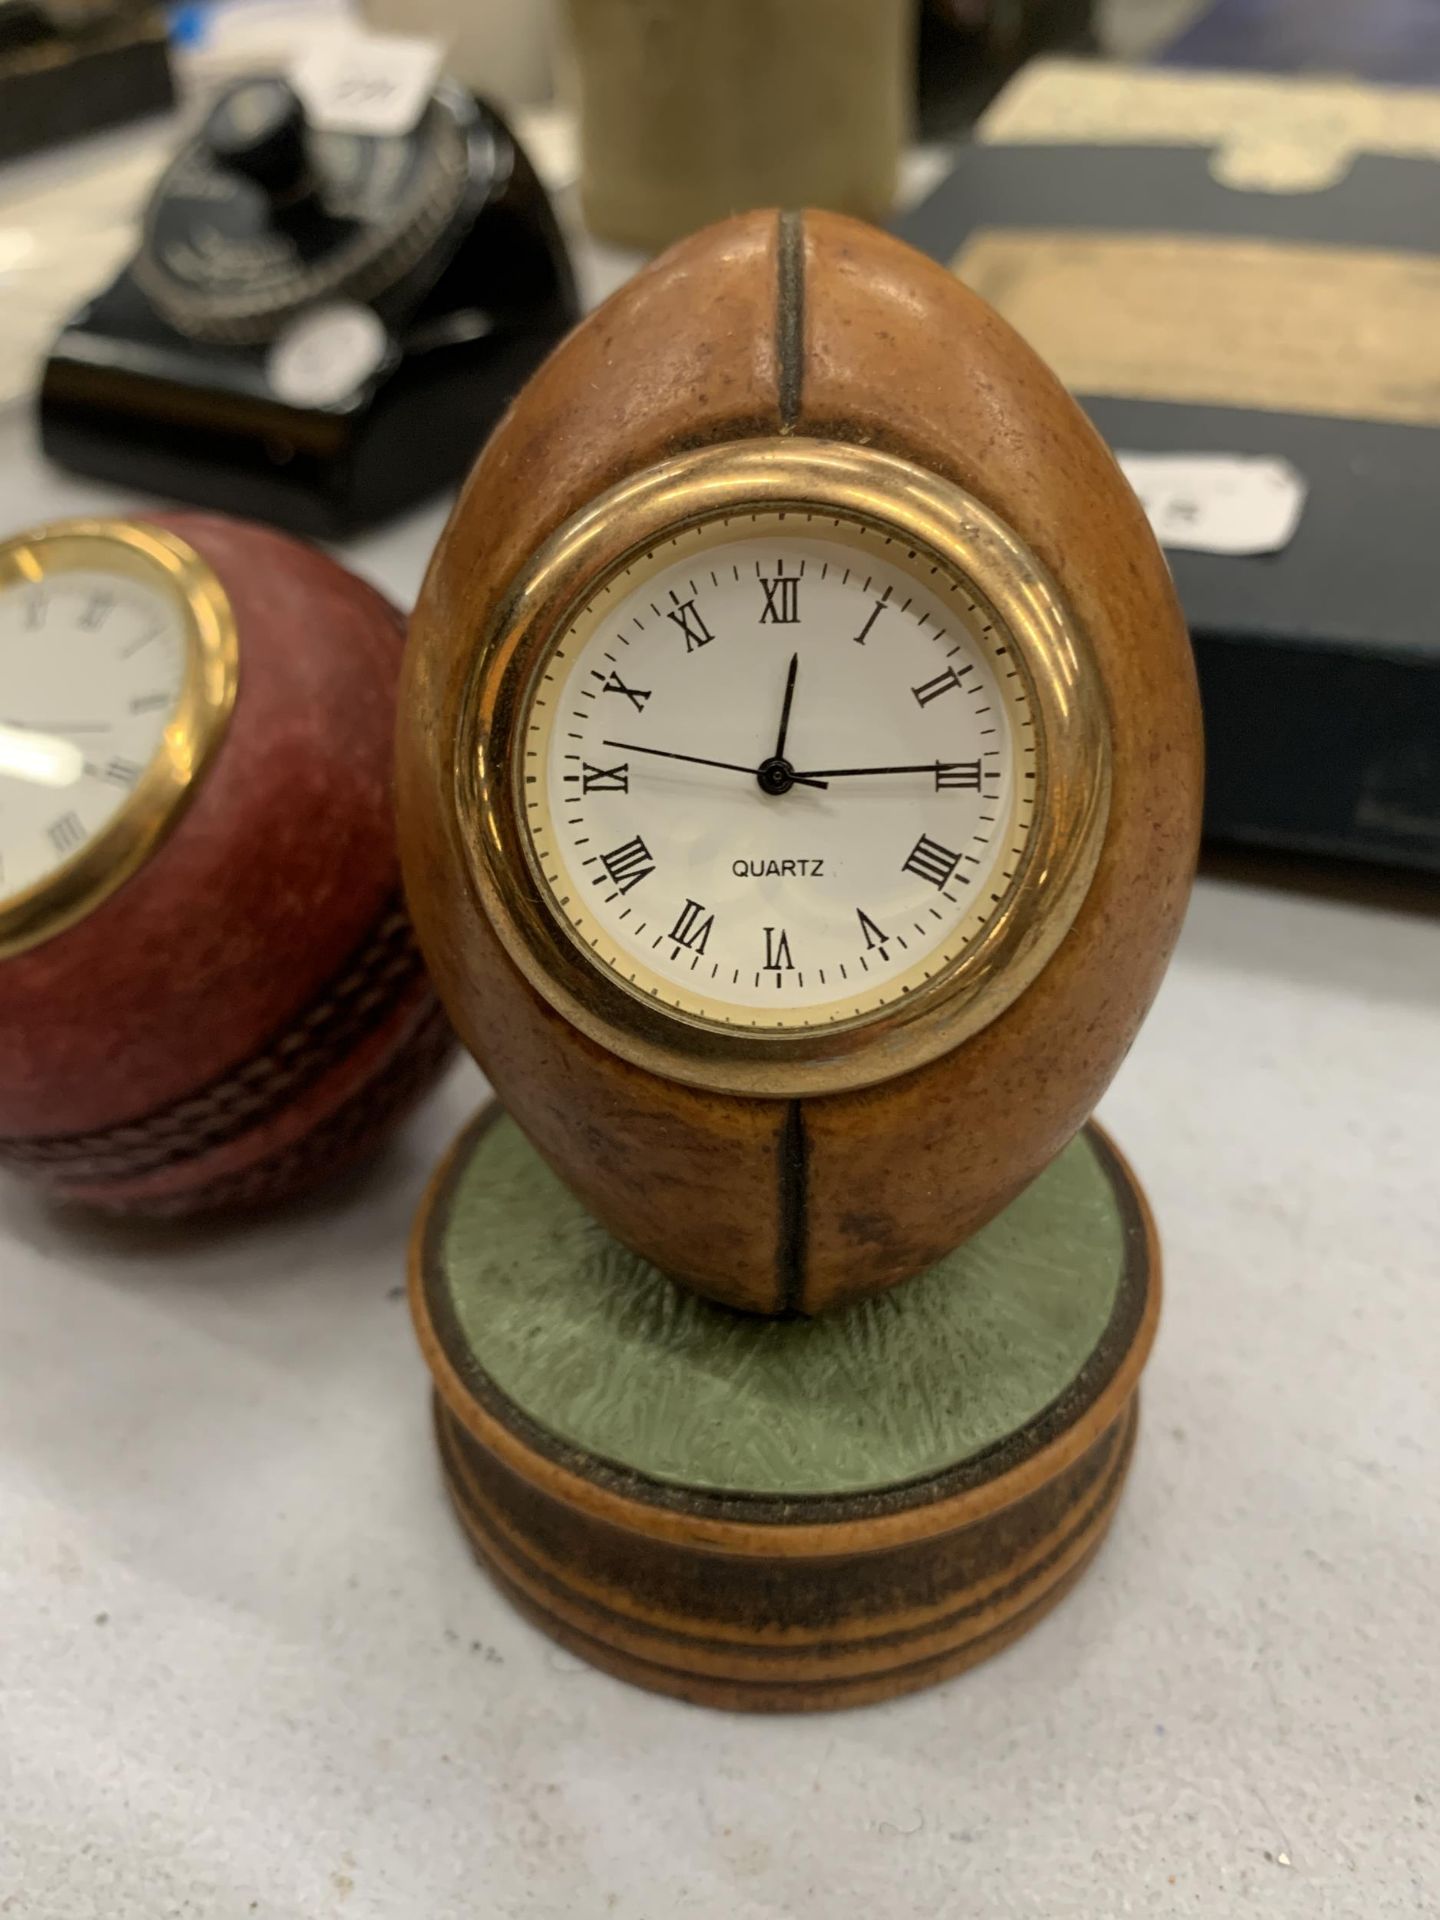 TWO HISTORY CRAFT DESK CLOCKS IN THE FORM OF A CRICKET BALL AND RUGBY BALL - Image 2 of 3